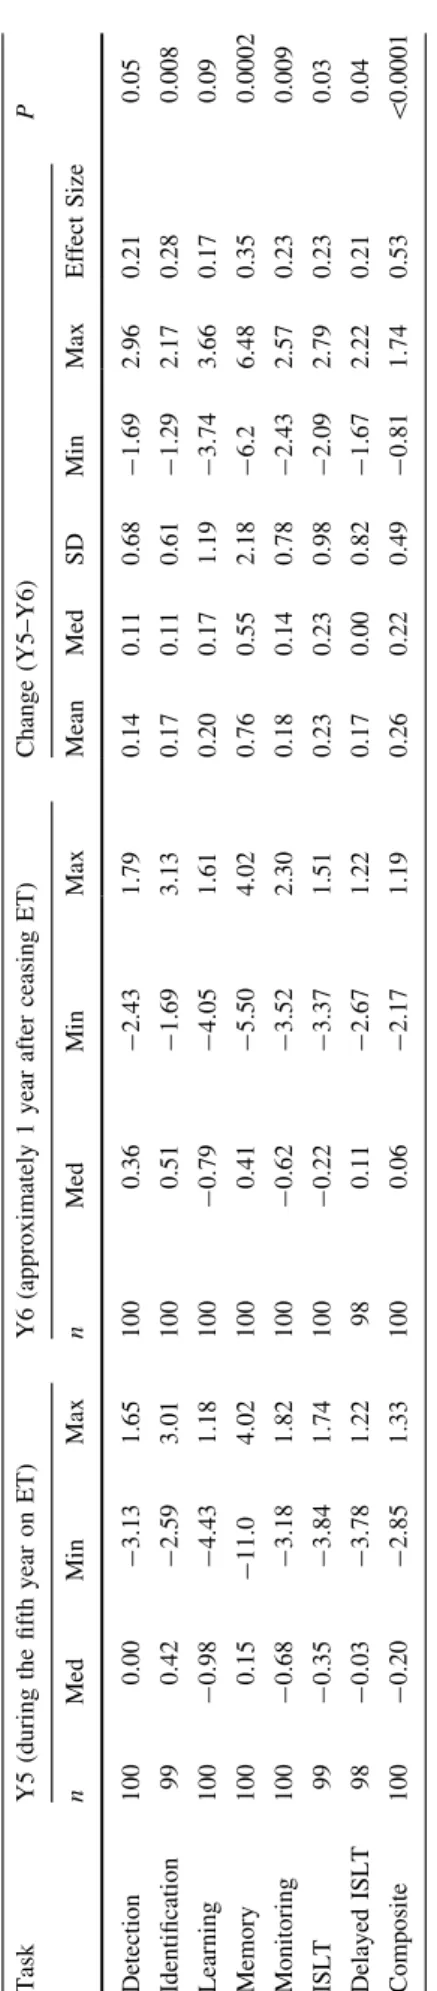 Fig. 2 Change in median age-adjusted composite score from the assessment taken at the end of endocrine therapy (Y5) to the assessment taken approximately 1 year after completion of endocrine therapy (Y6) according to endocrine therapy received, showing sig